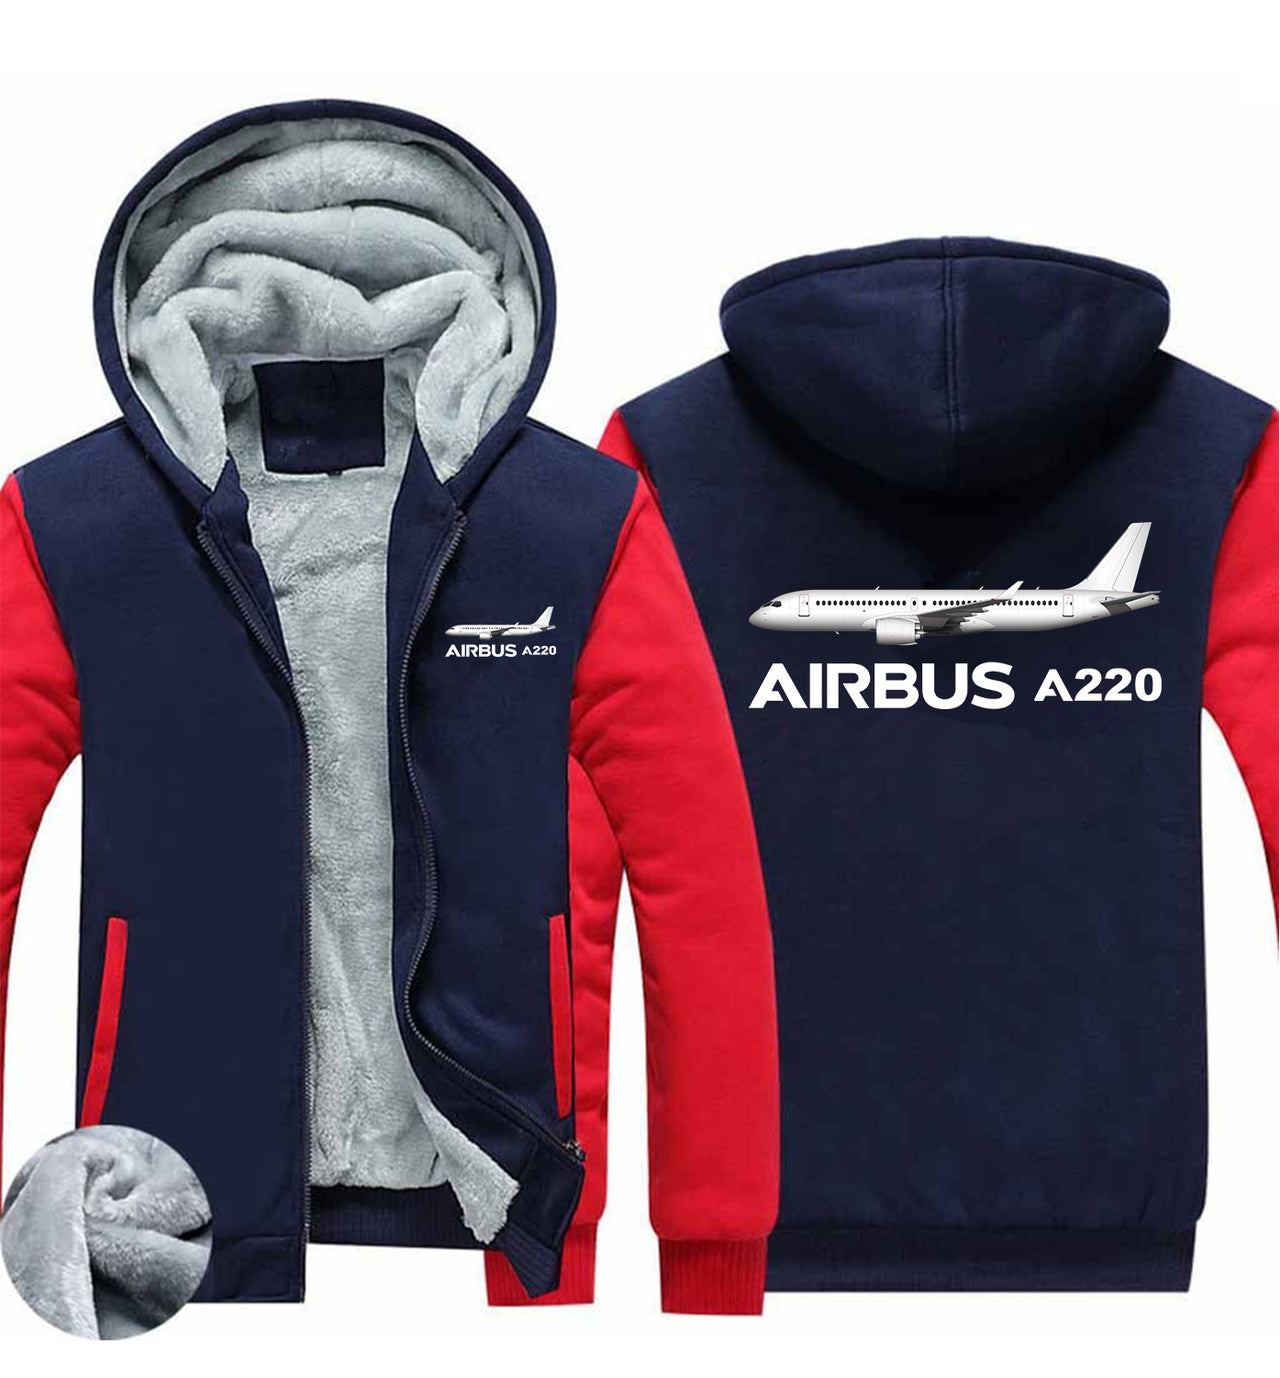 The Airbus A220 Designed Zipped Sweatshirts